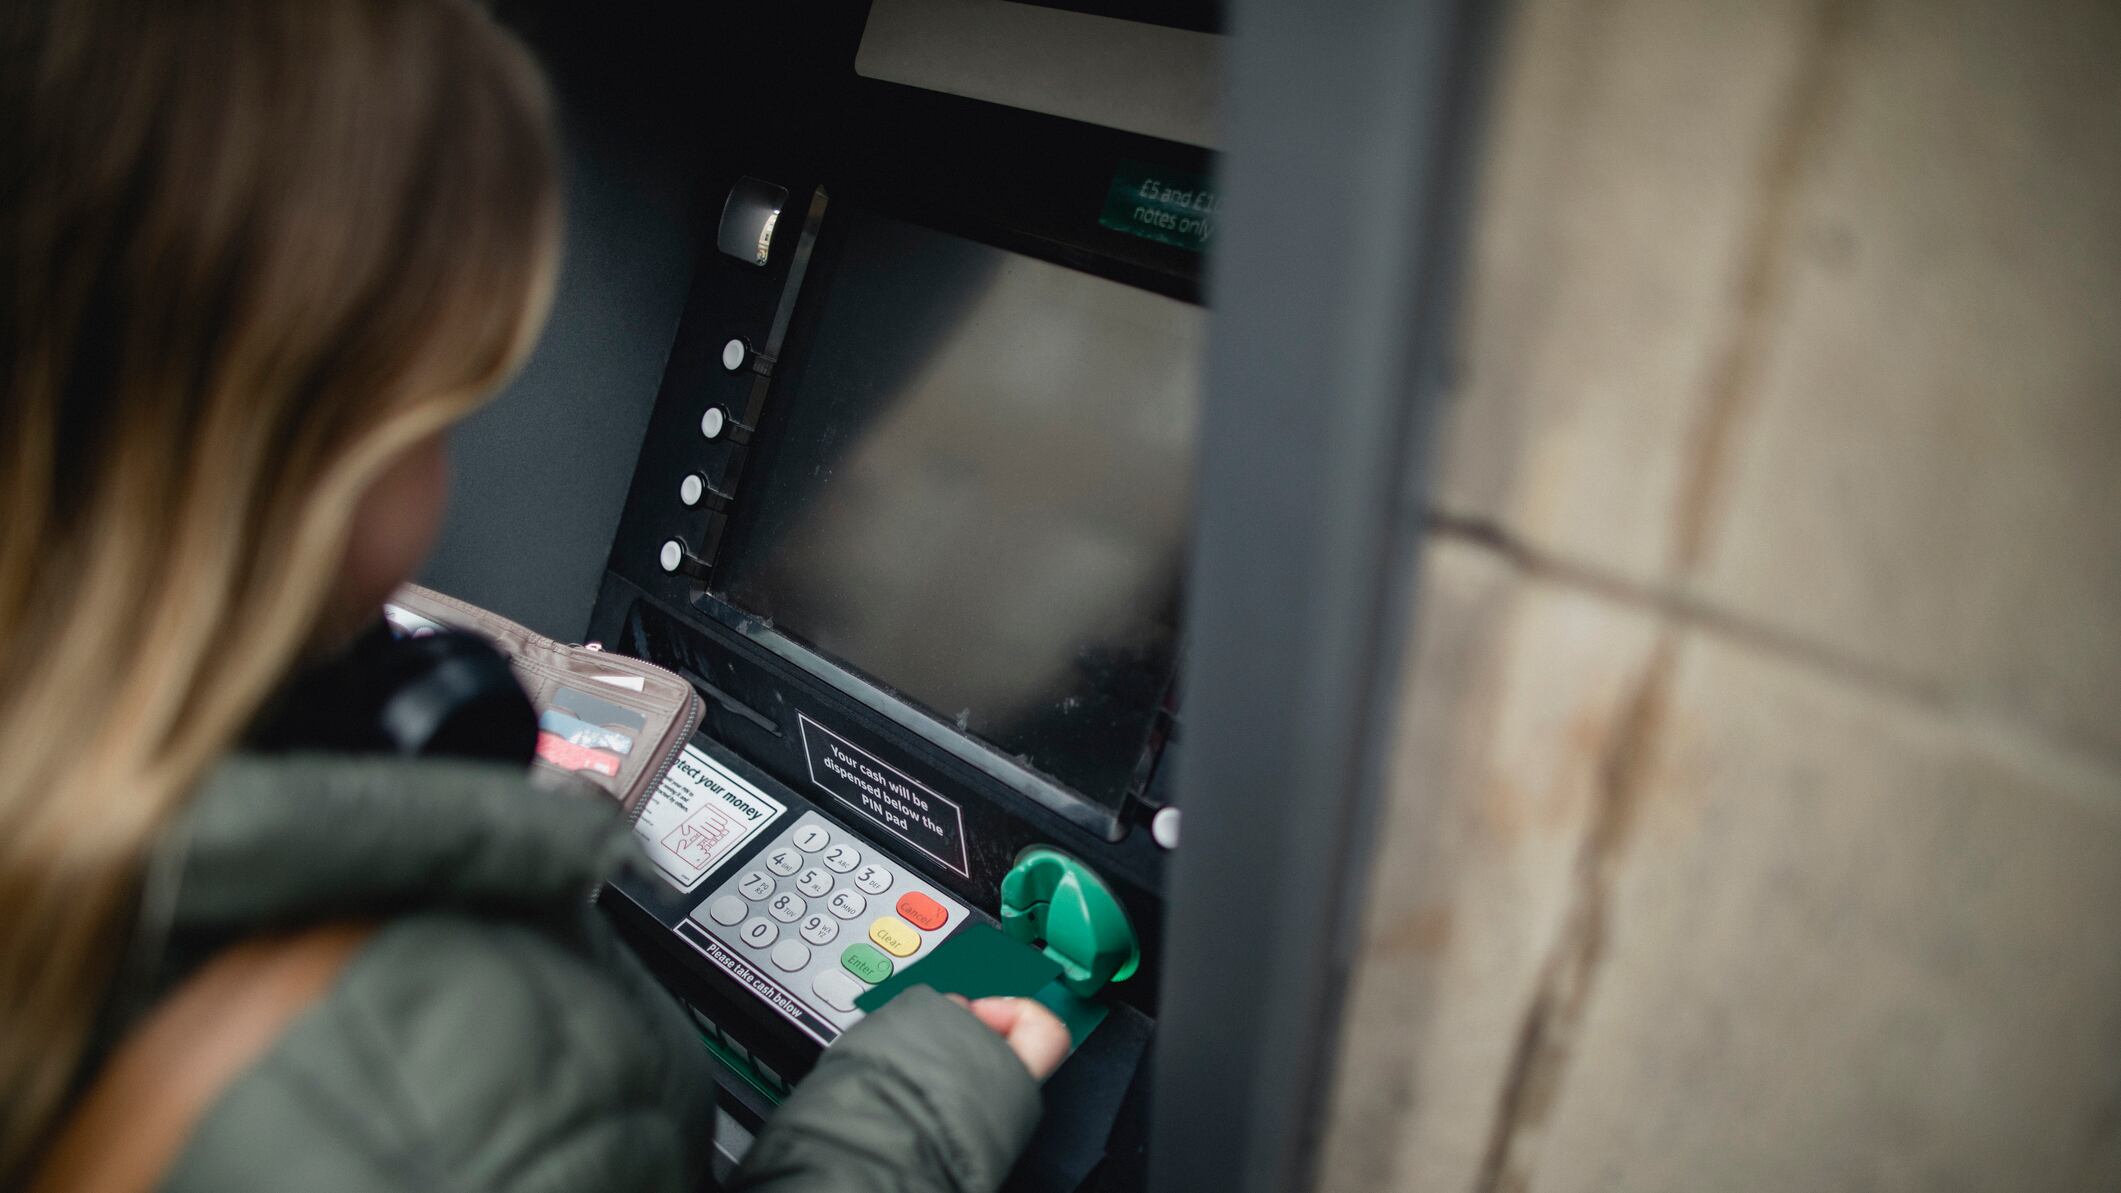 Over the shoulder view of a young female adult using a cashpoint machine.